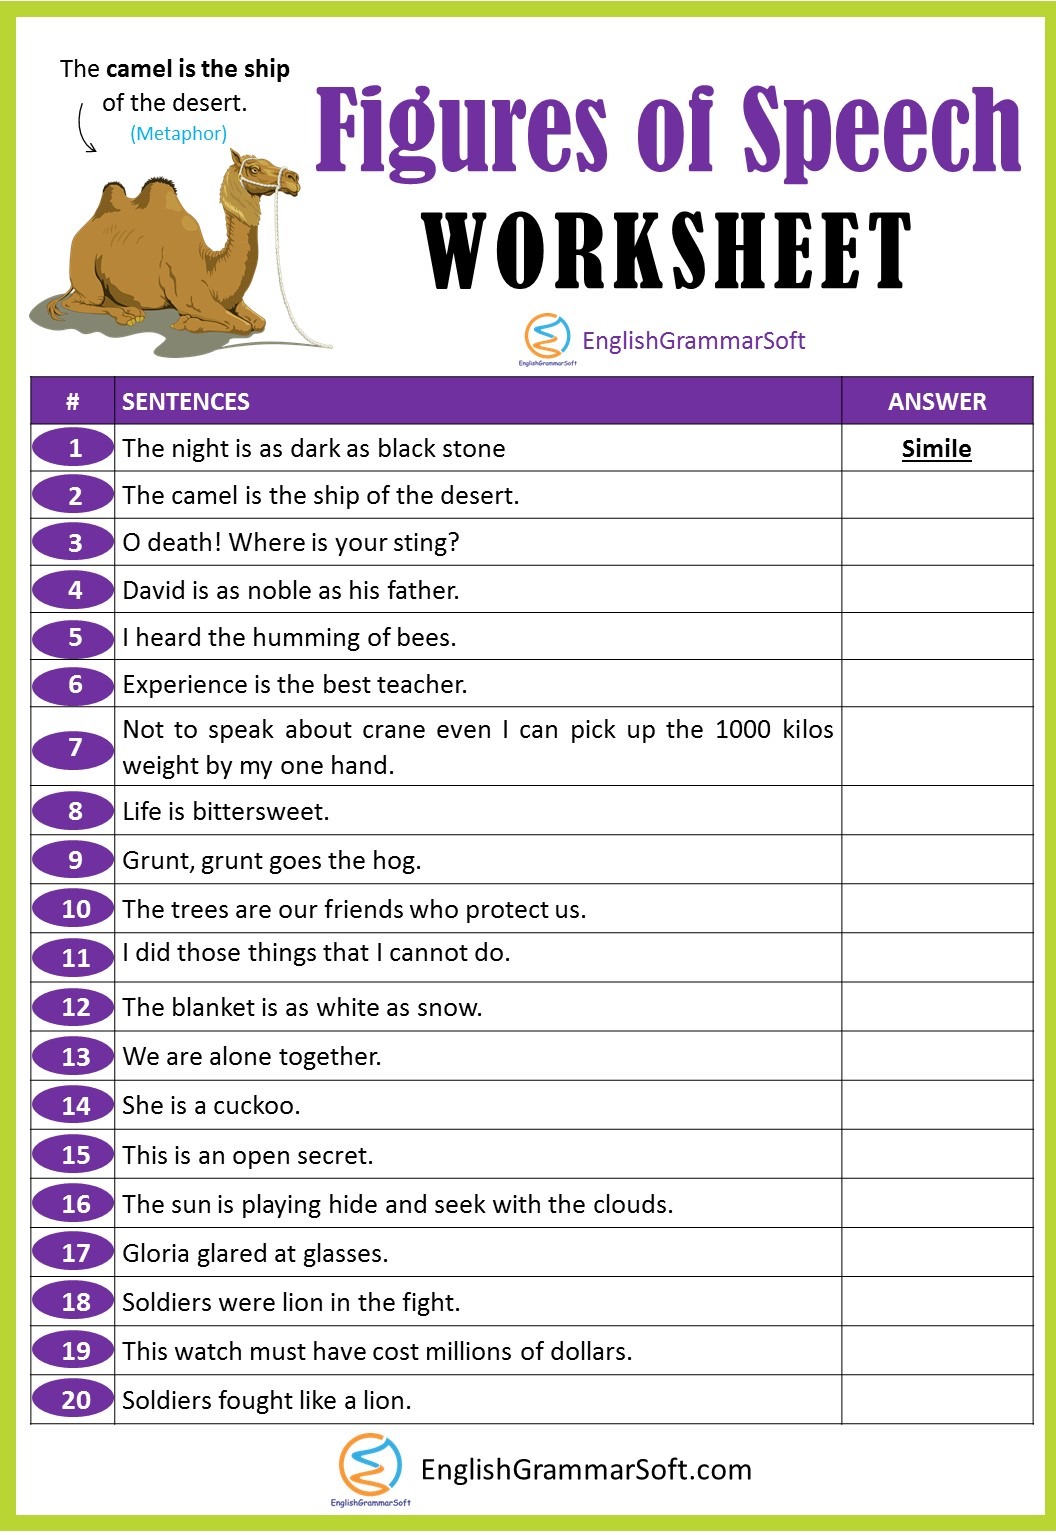 Figures of Speech Worksheet with Answers - EnglishGrammarSoft Throughout Part Of Speech Worksheet Pdf